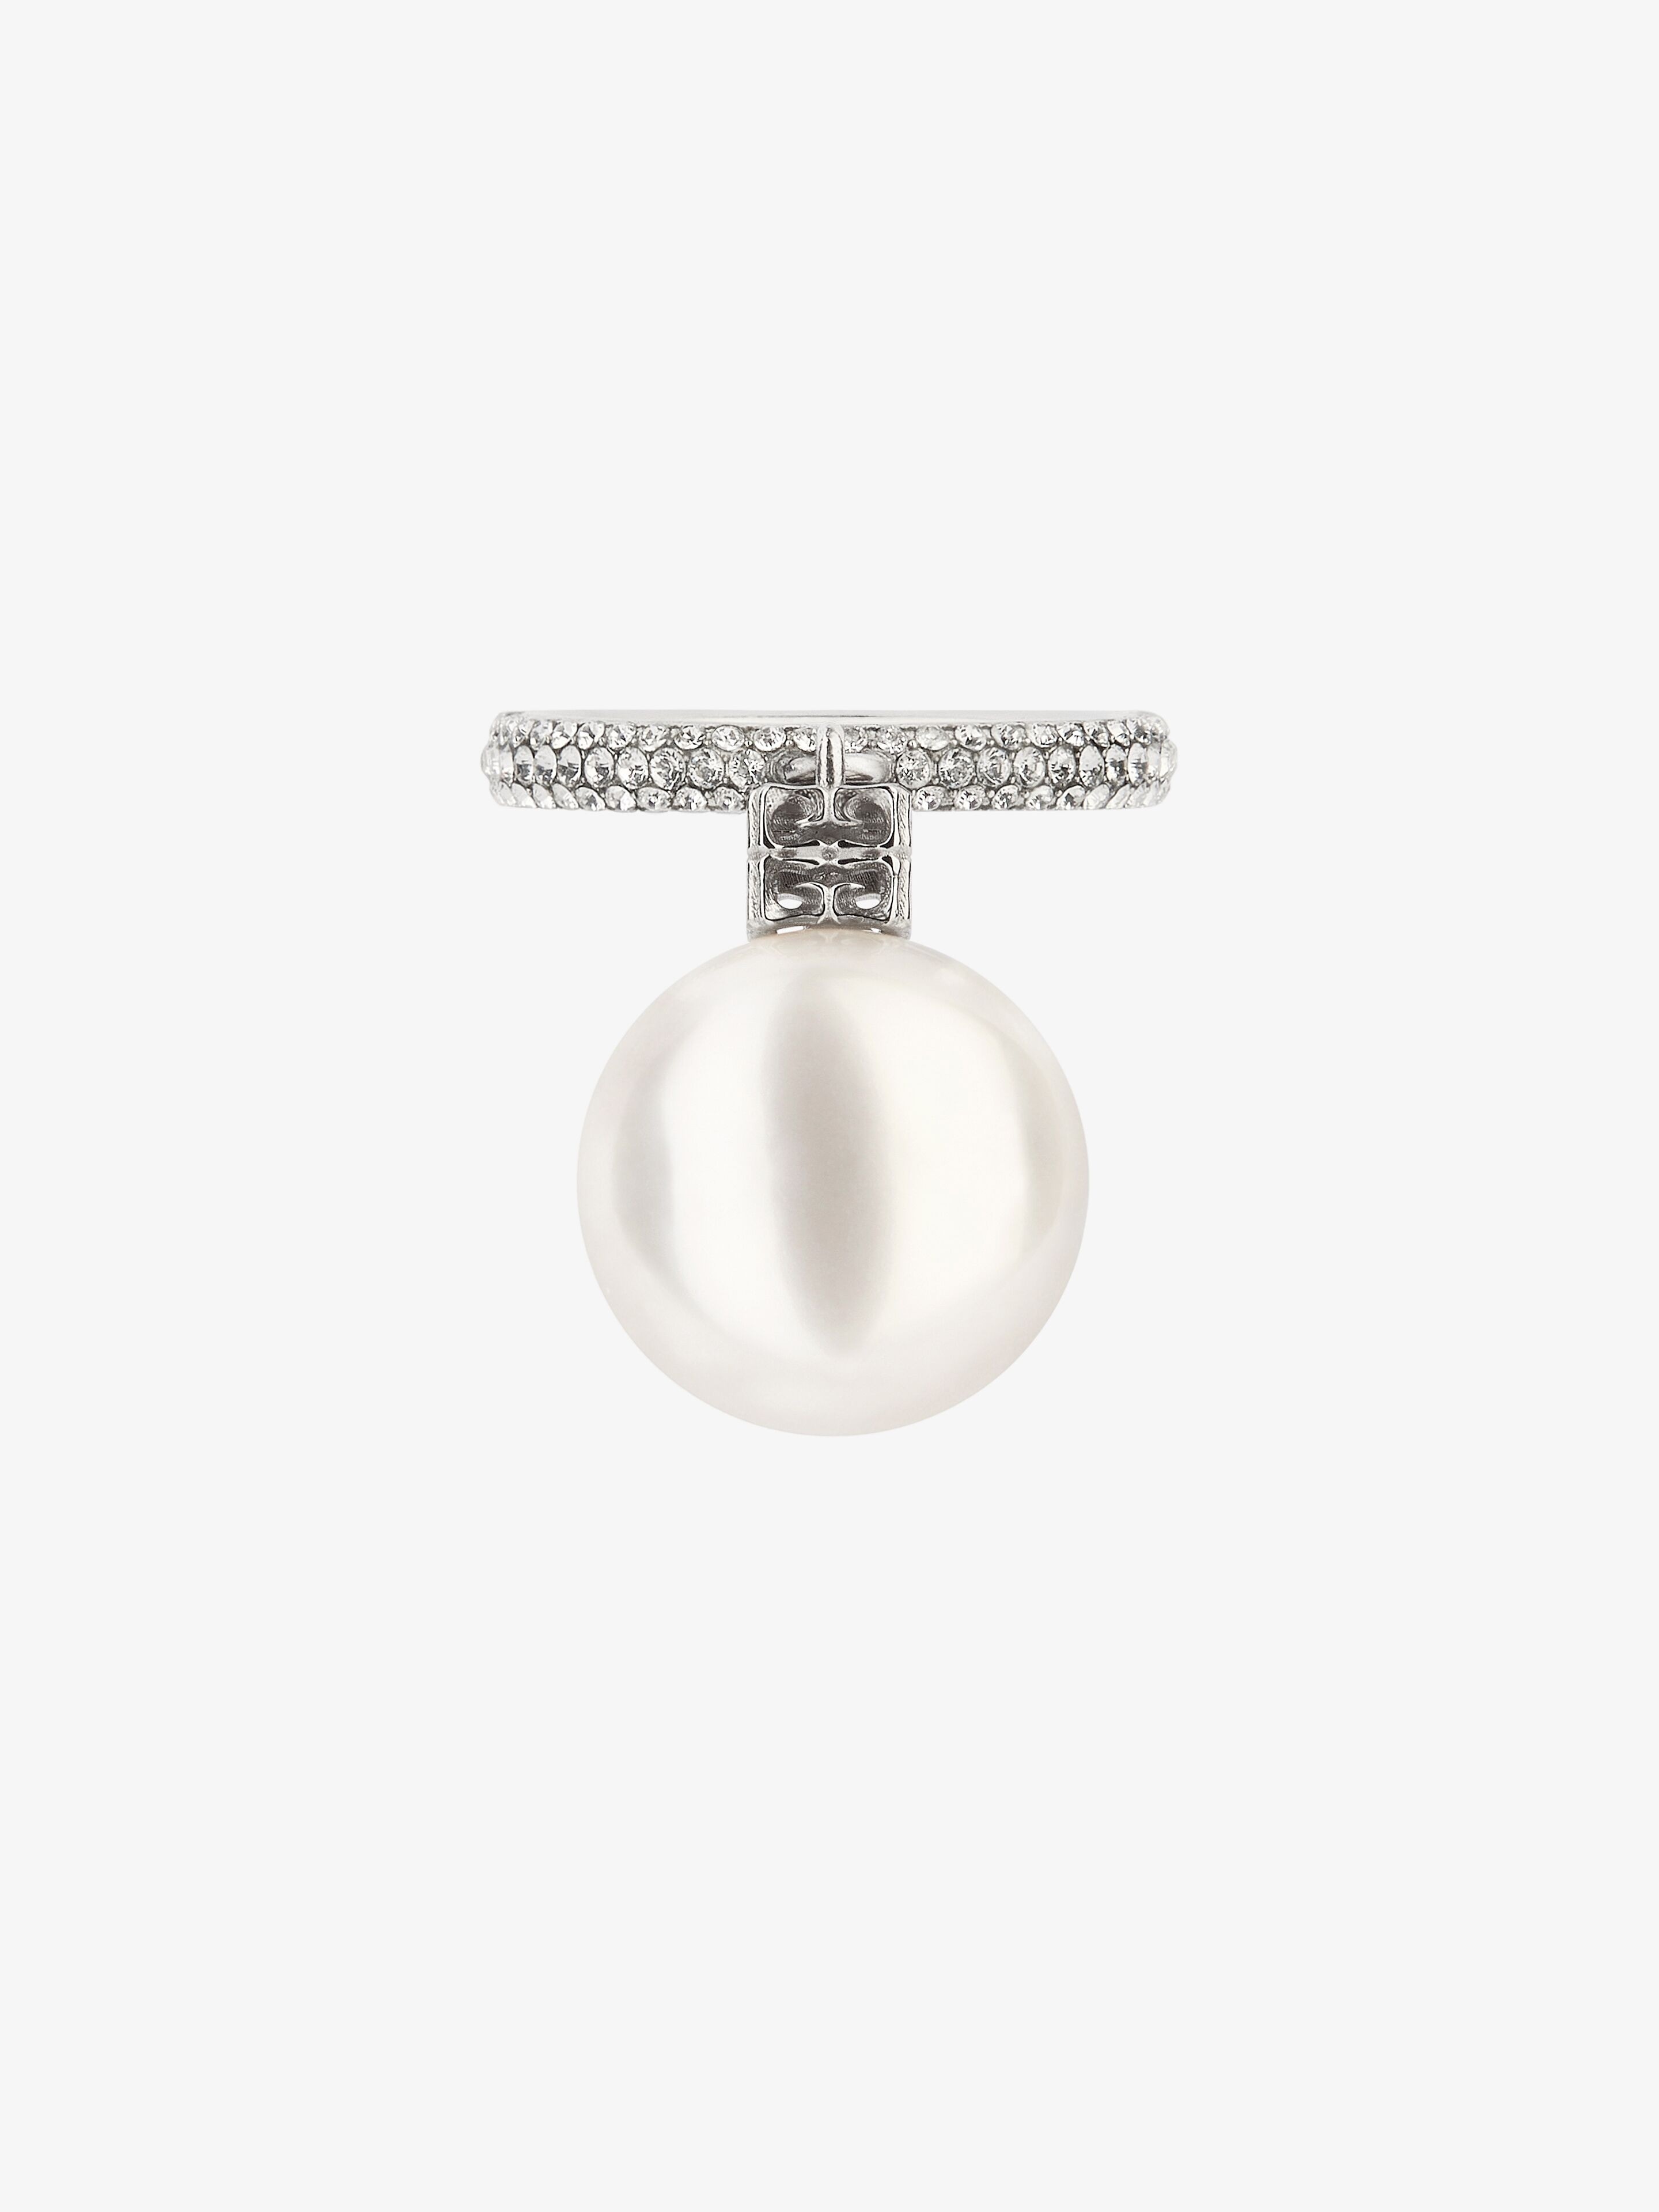 PEARL RING IN METAL WITH CRYSTALS - 1